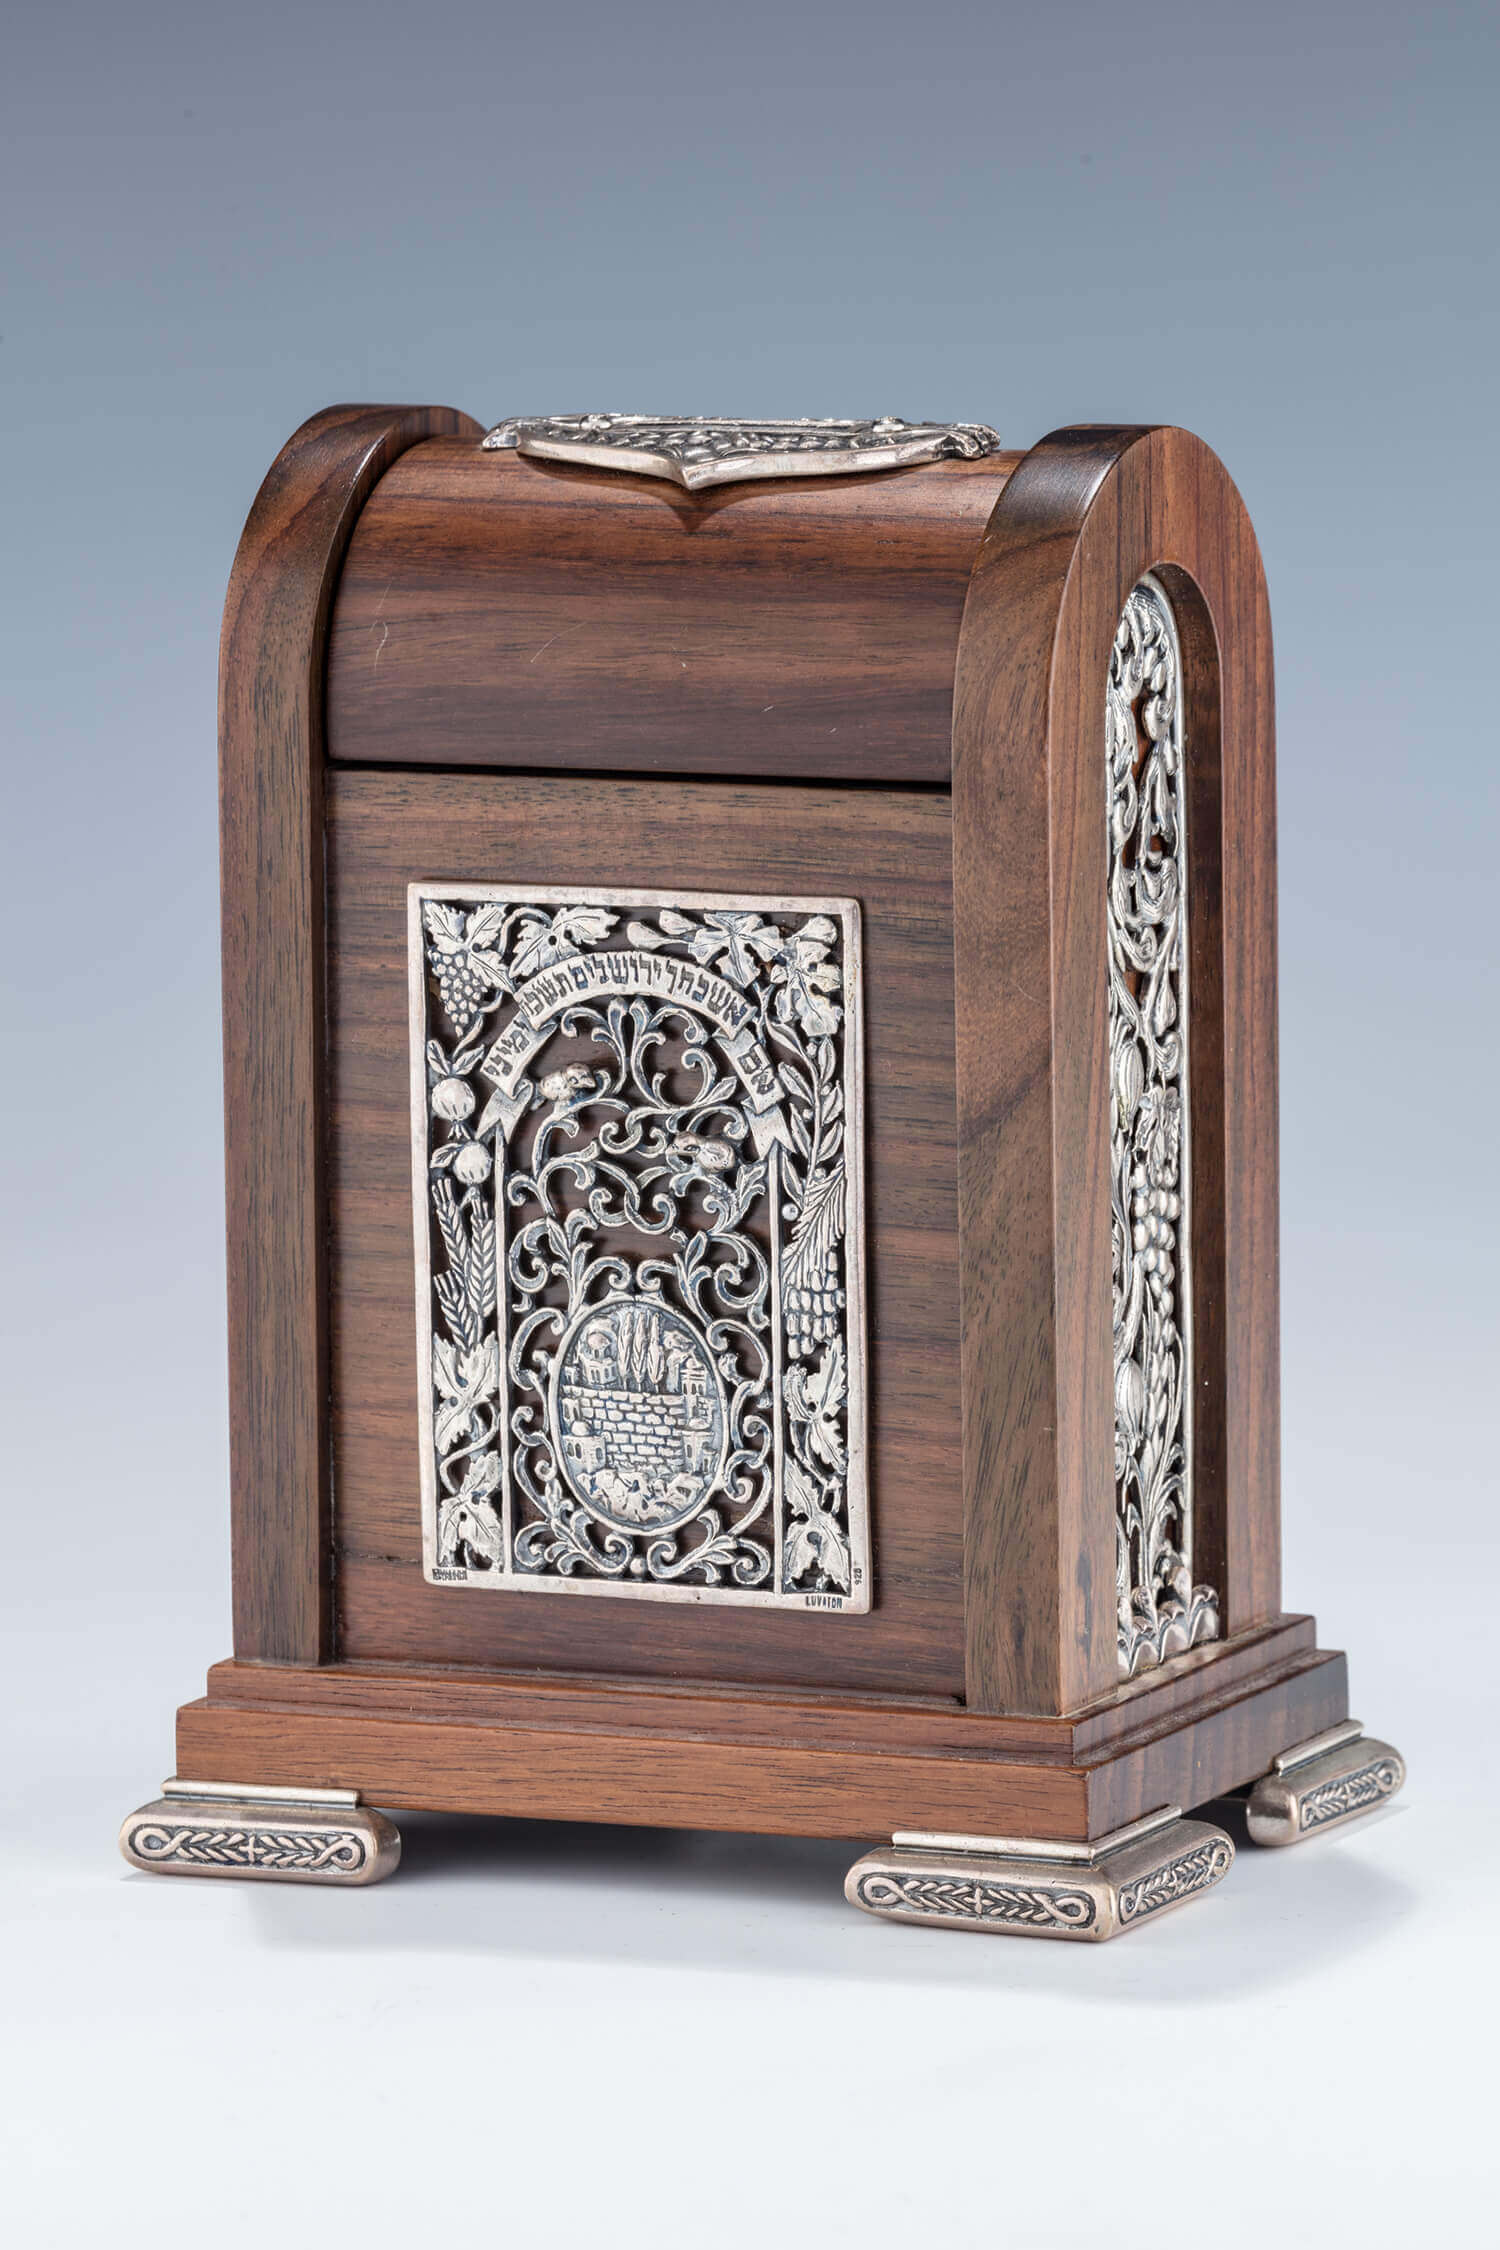 135. A WOODEN AND STERLING CHARITY BOX BY LUVATON